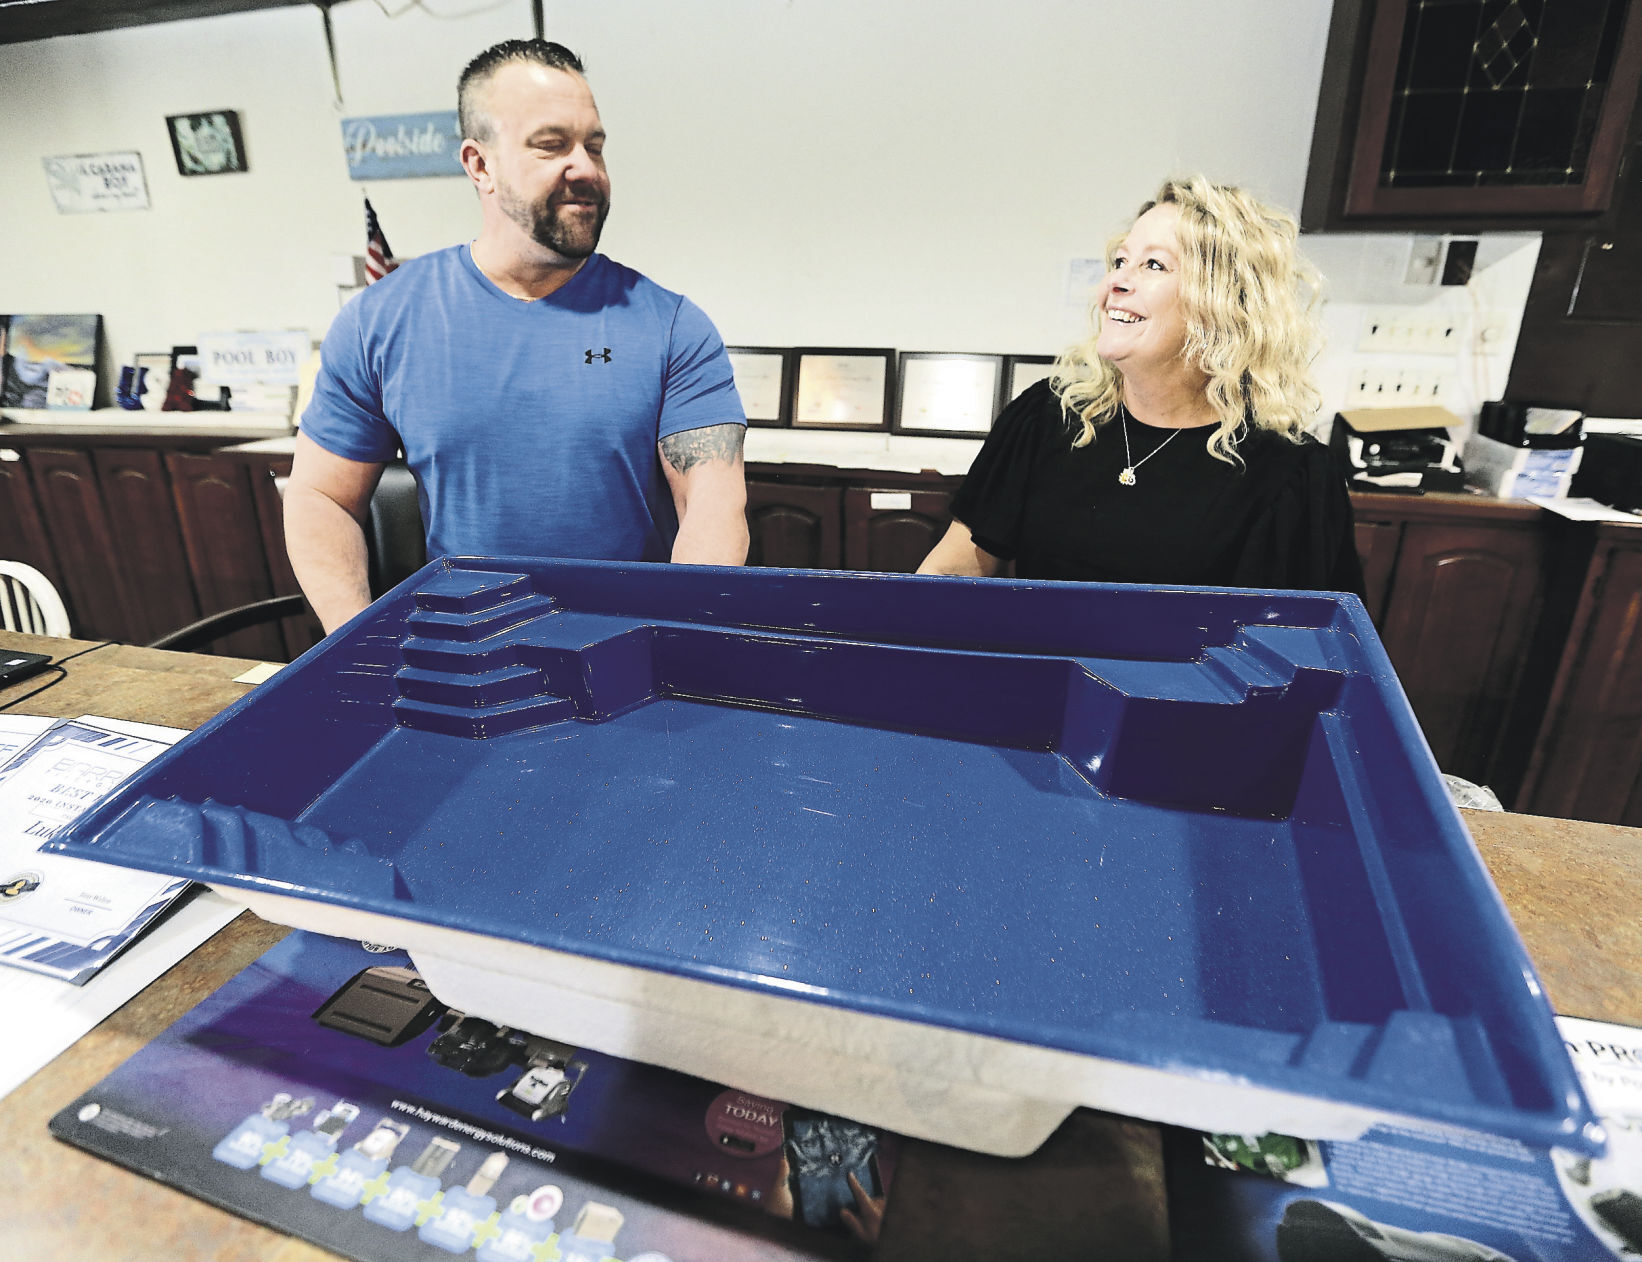 Luke and Brooke Tigges, the owners of Tri-State Pool & Spa in East Dubuque, Ill., specialize in fiberglass and in-ground pools. PHOTO CREDIT: Dave Kettering